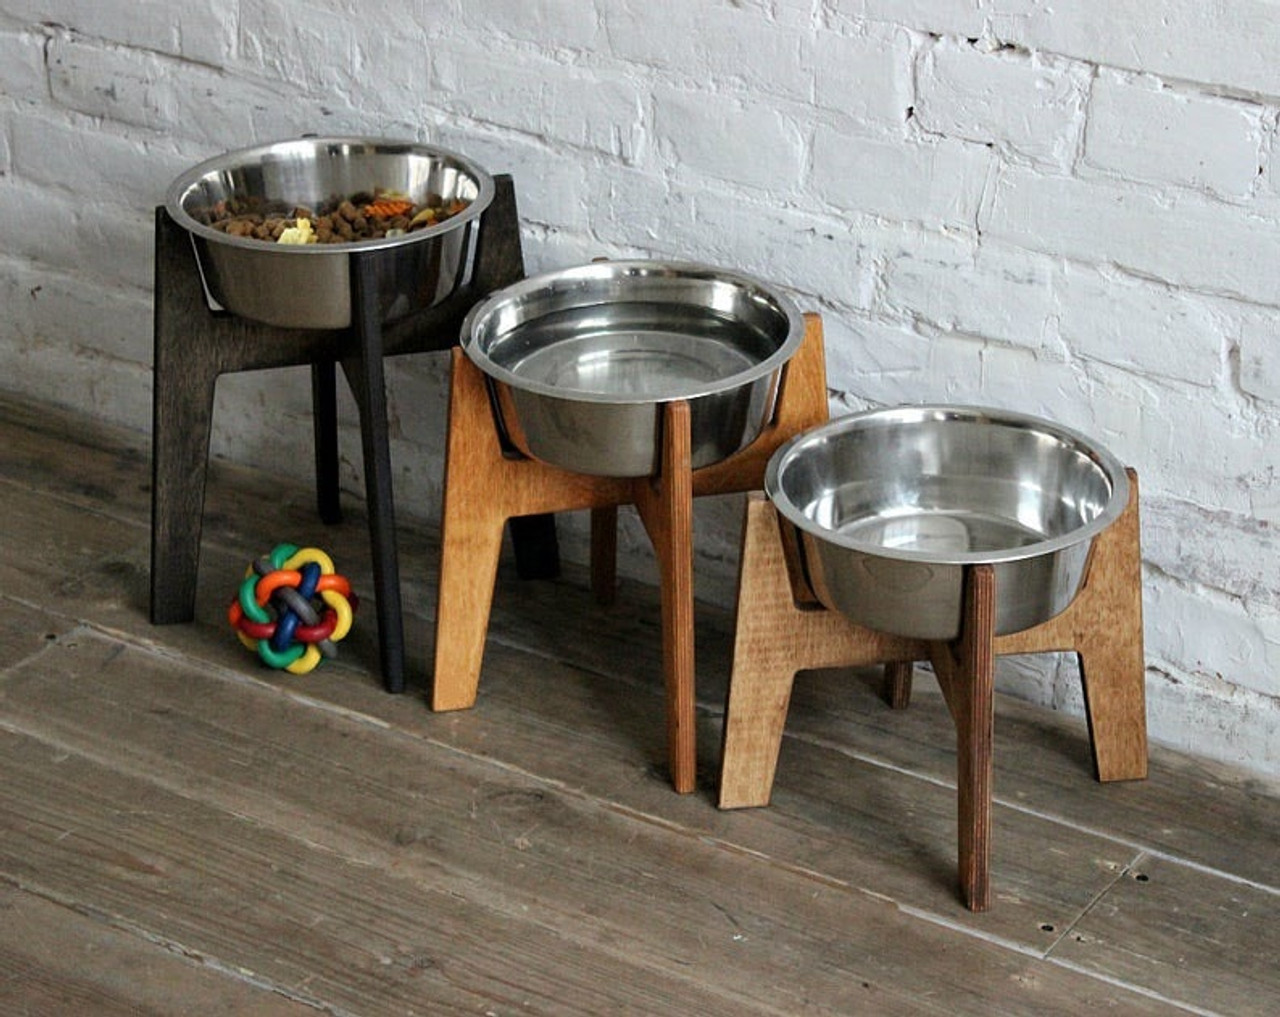 https://cdn11.bigcommerce.com/s-zy7iaurt44/images/stencil/1280x1280/products/1888/7846/Elevated_Dog_Bowls_-_Single_Dog_Bowl_Stand___02769.1645719246.JPG?c=2